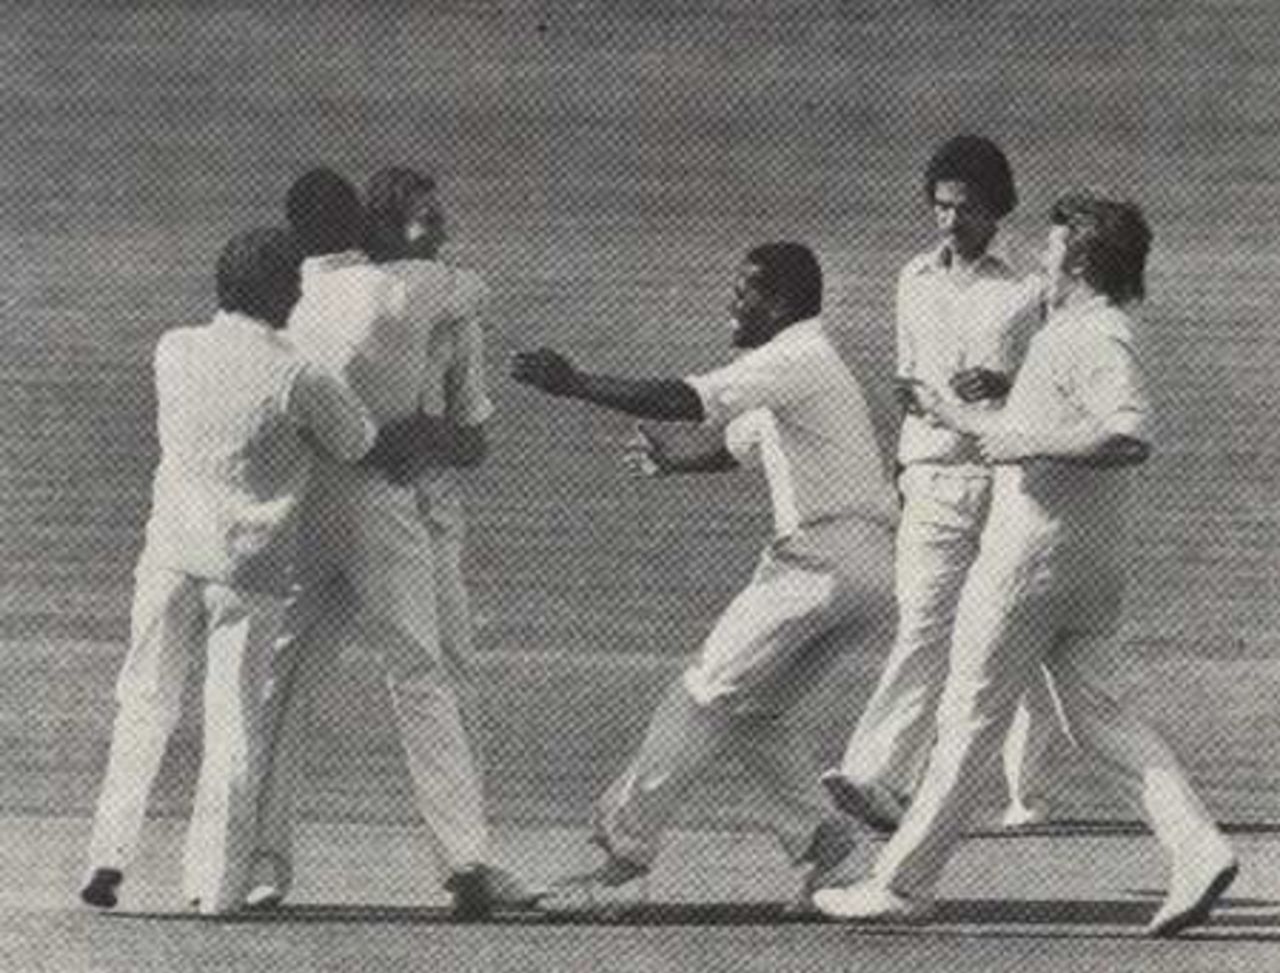 Malcolm Nash is congratulated by his team-mates after dismissing Middlesex captain Mike Brearley in the opening over of the Middlesex innings, Gillette Cup final, Lord's, September 3, 1977